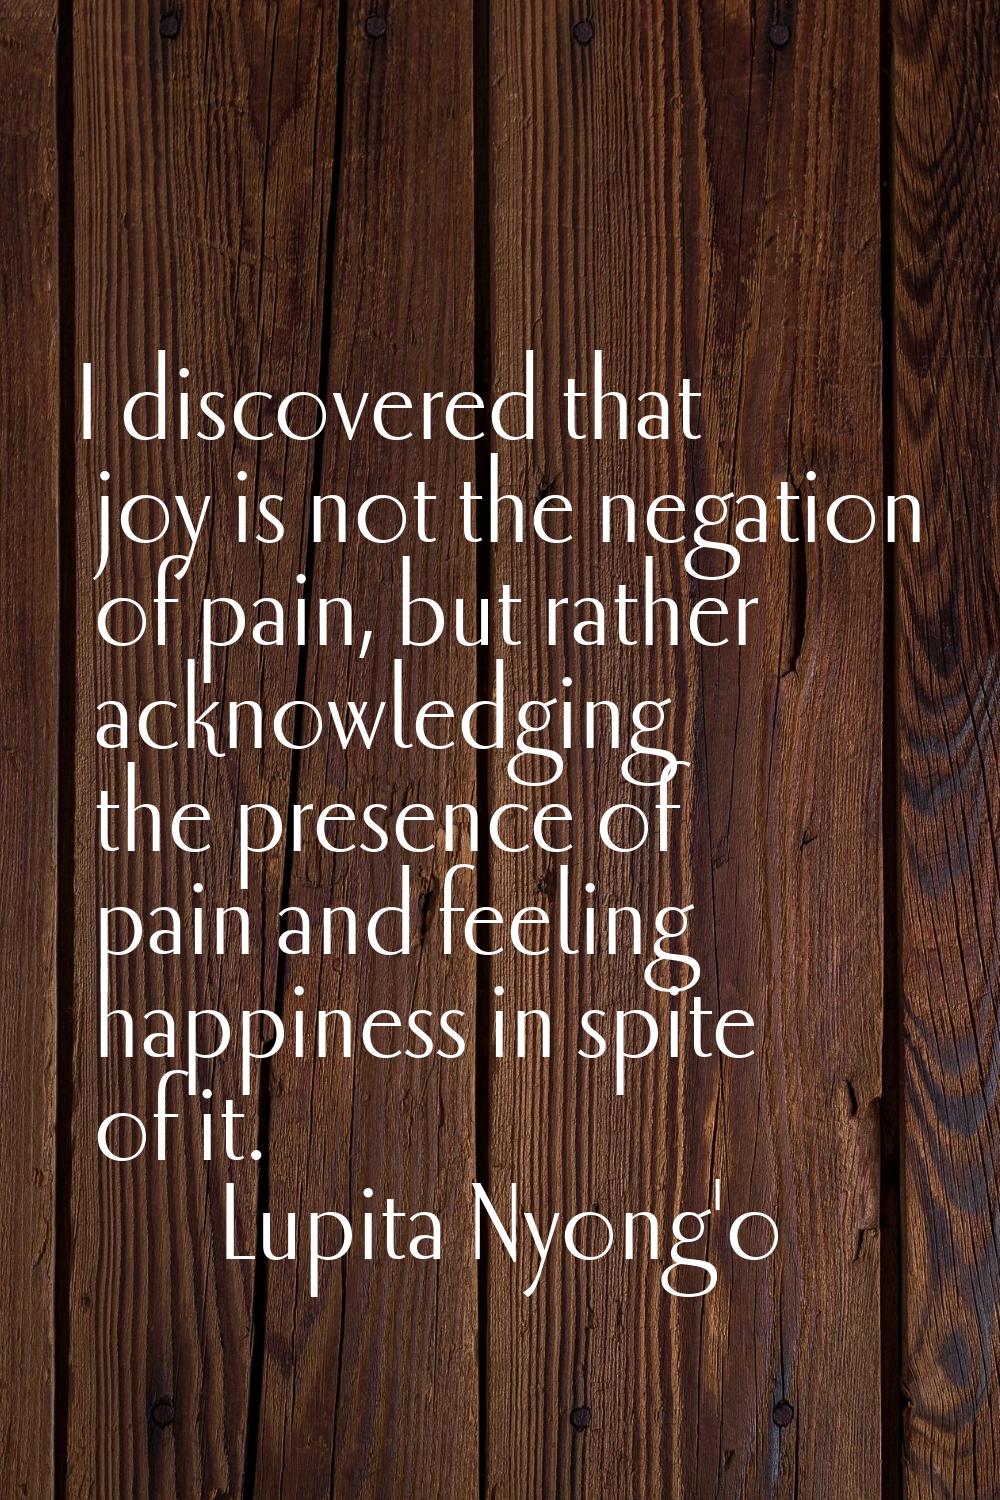 I discovered that joy is not the negation of pain, but rather acknowledging the presence of pain an